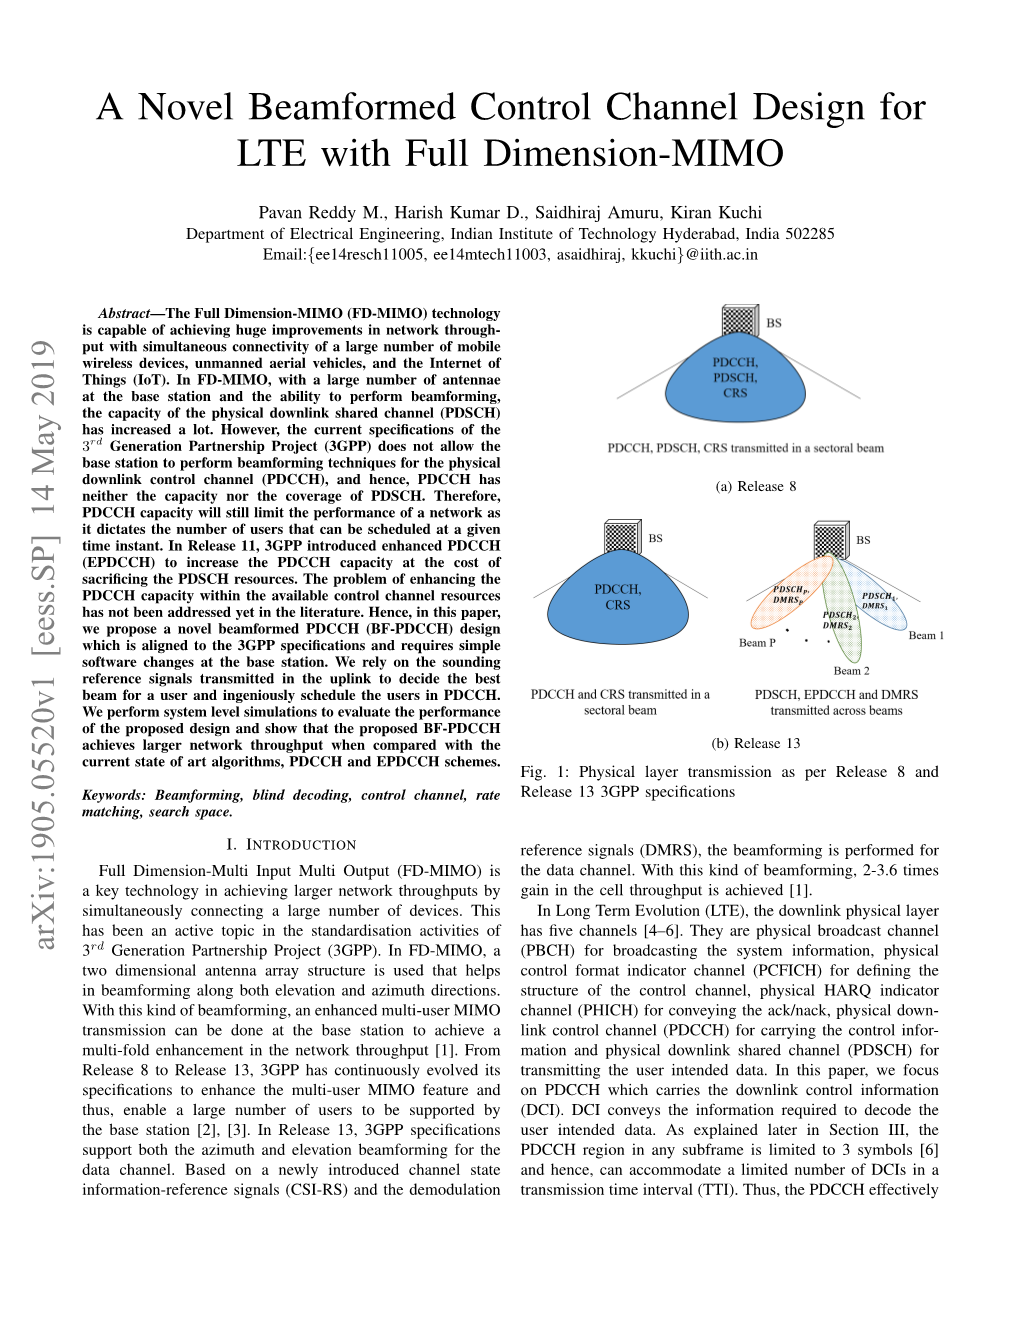 A Novel Beamformed Control Channel Design for LTE with Full Dimension-MIMO